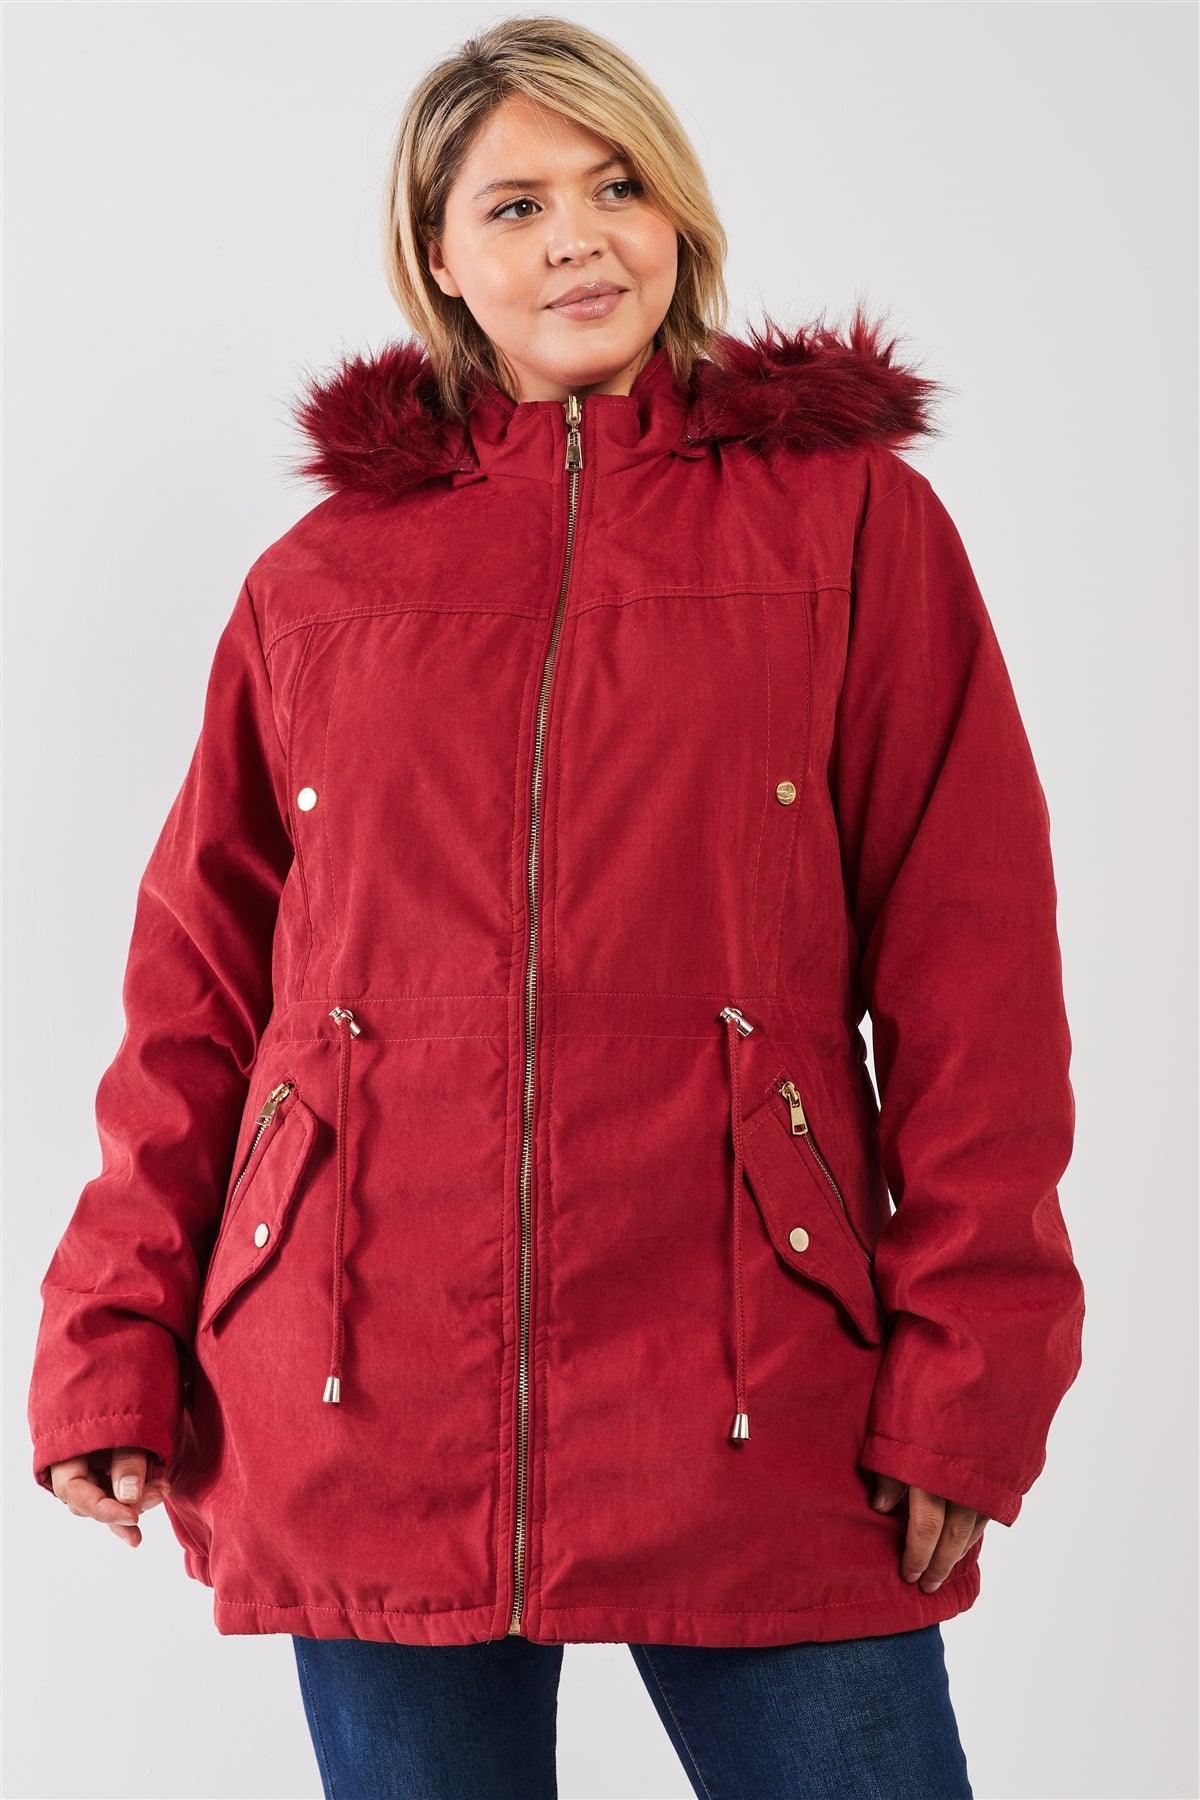 Junior Plus Size Reversible Wine Red Dyed Vegan Fur Double-Sided Cotton Twill Parka & Puffer Jacket /1-1-1-1